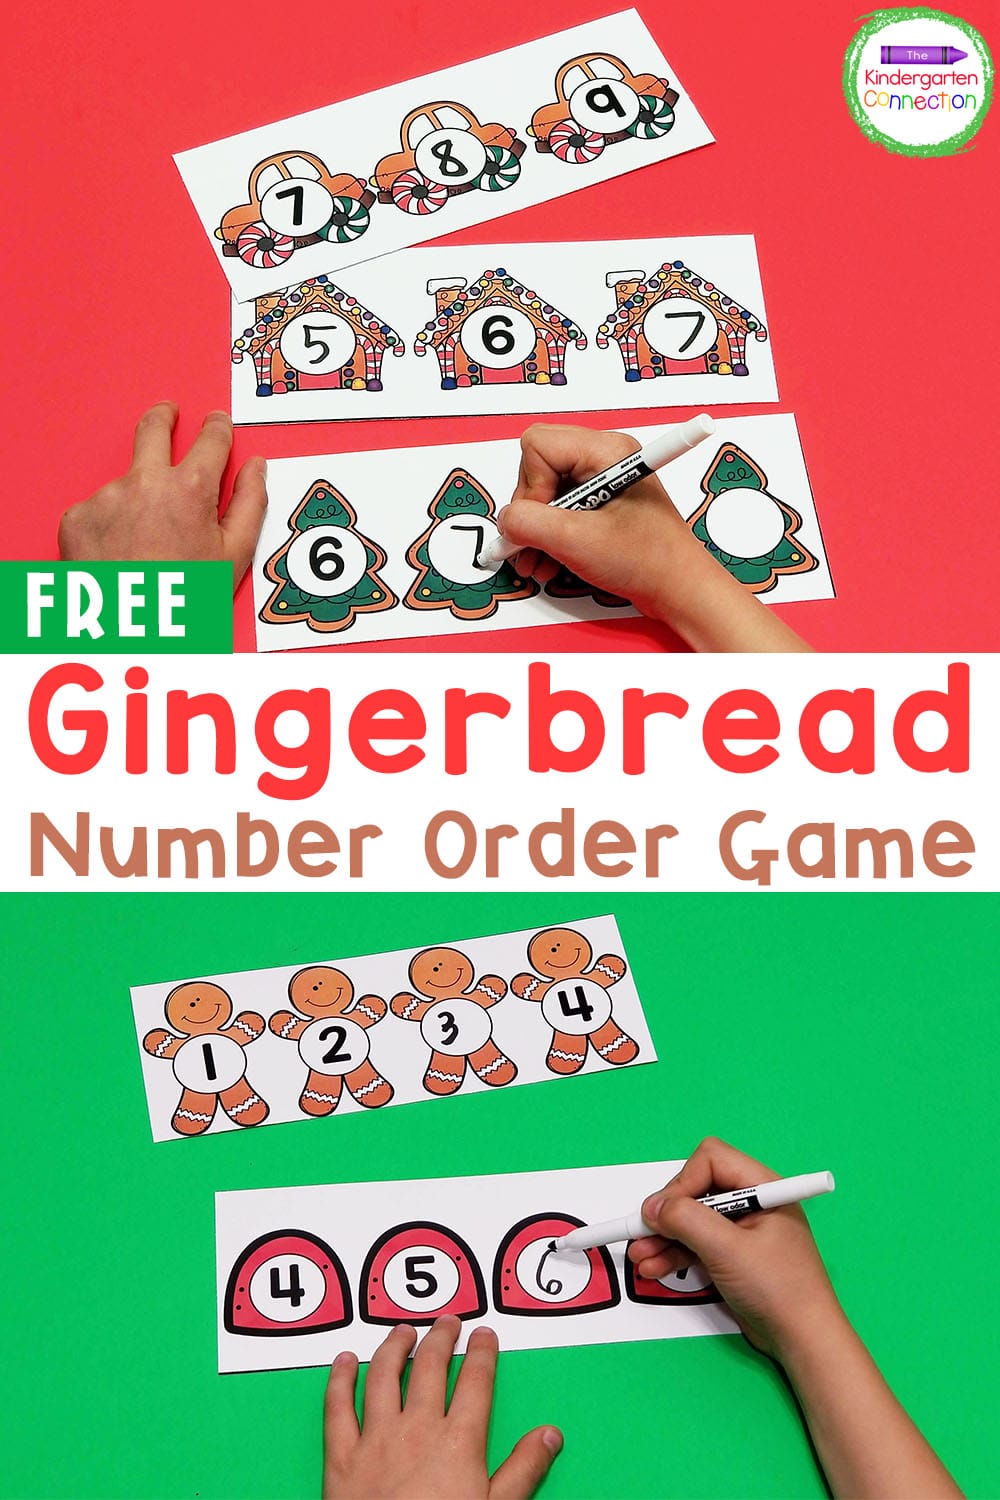 Grab our FREE Gingerbread Number Order Activity to build number sense while having tons of festive fun! It's great for Pre-K & Kindergarten!